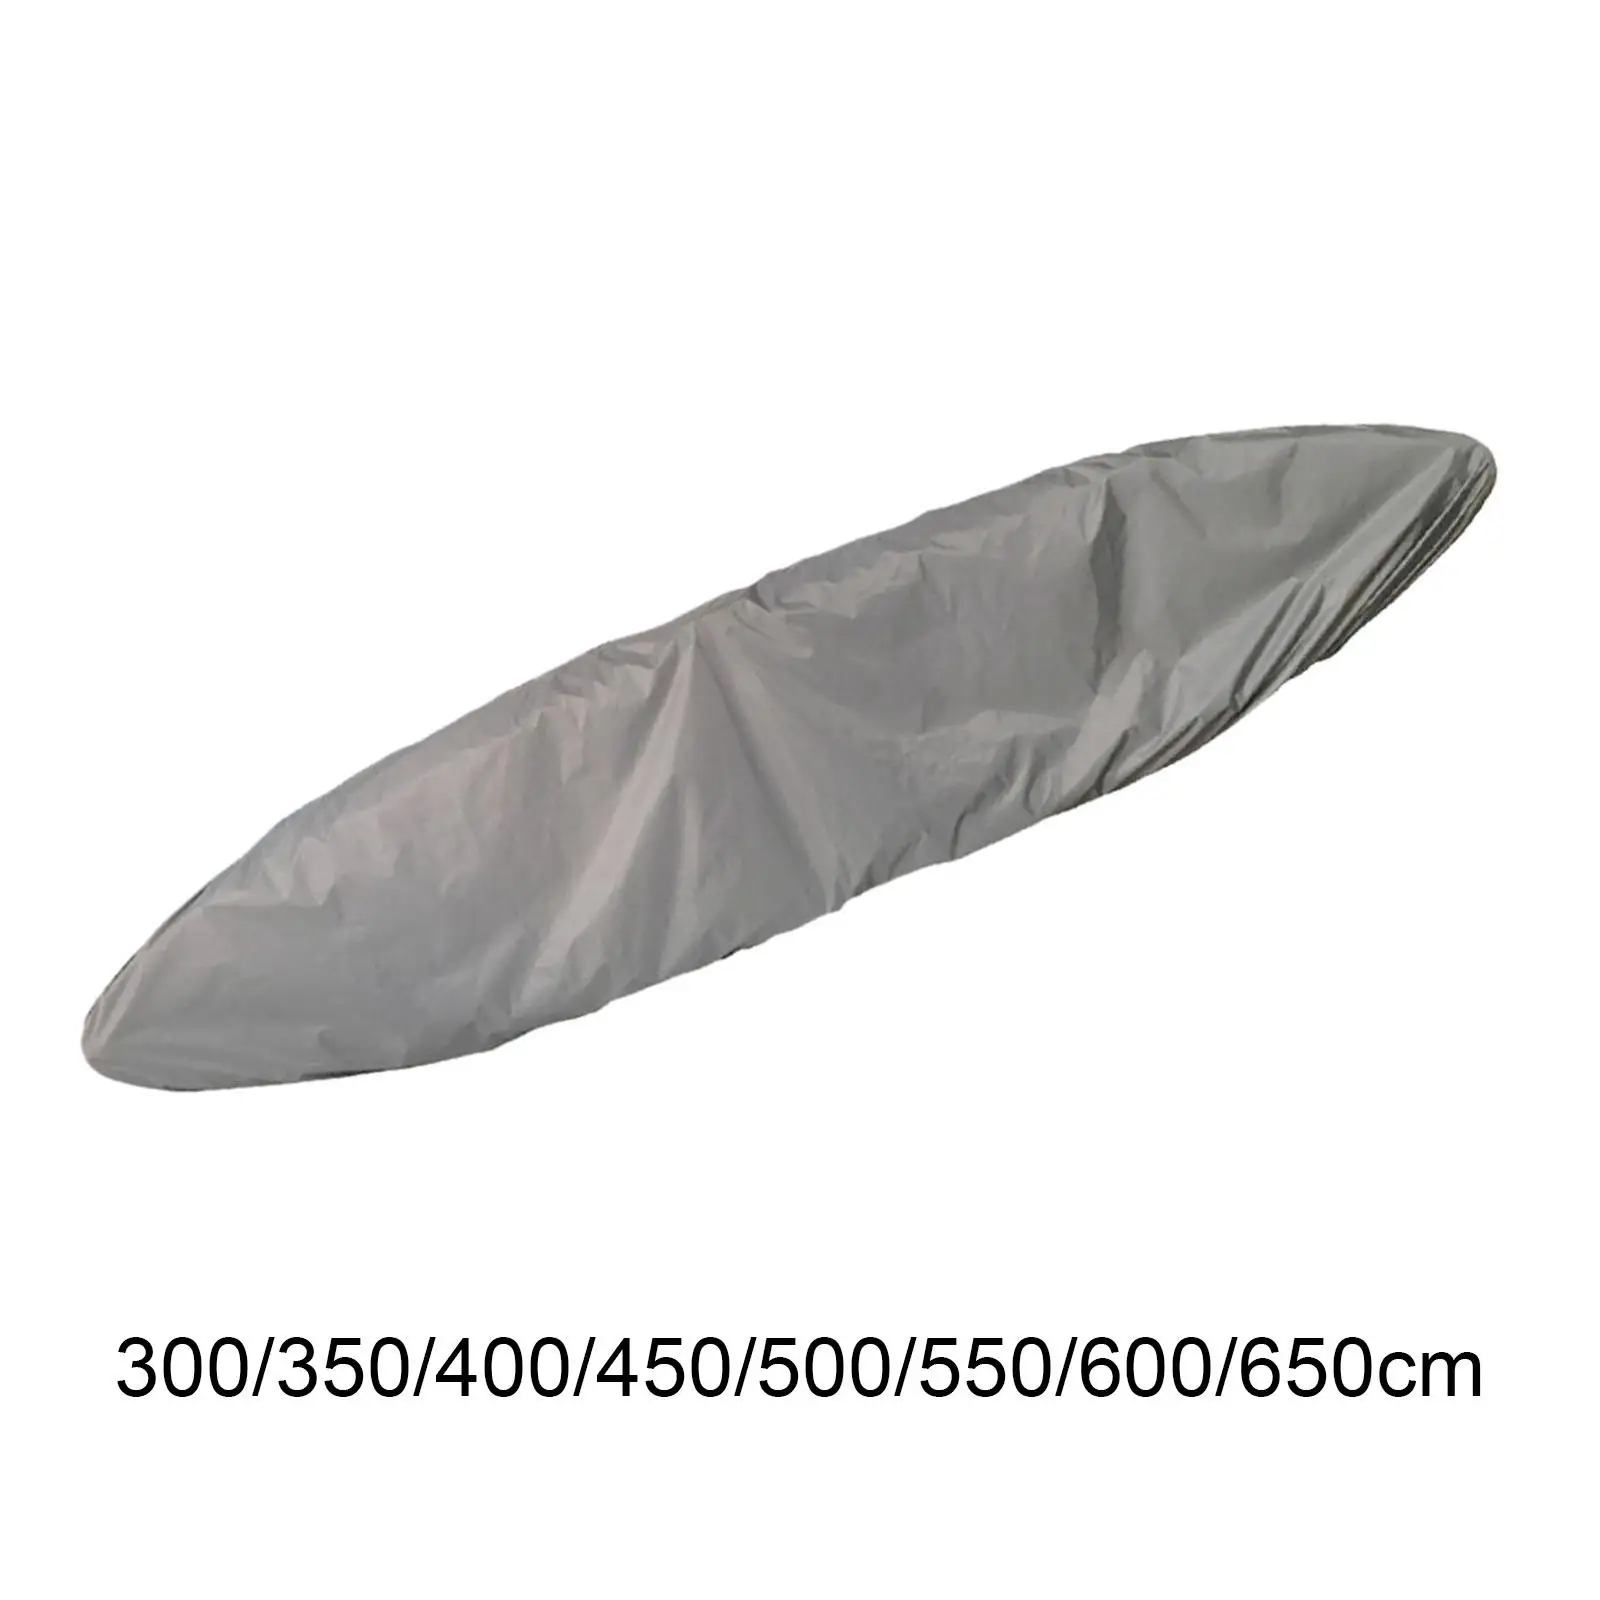 

Canoe Cover Sunblock Shield Oxford Cloth Dustproof Waterproof Kayak Cover Boat Dust Cover for Canoeing Drifting Water Sports